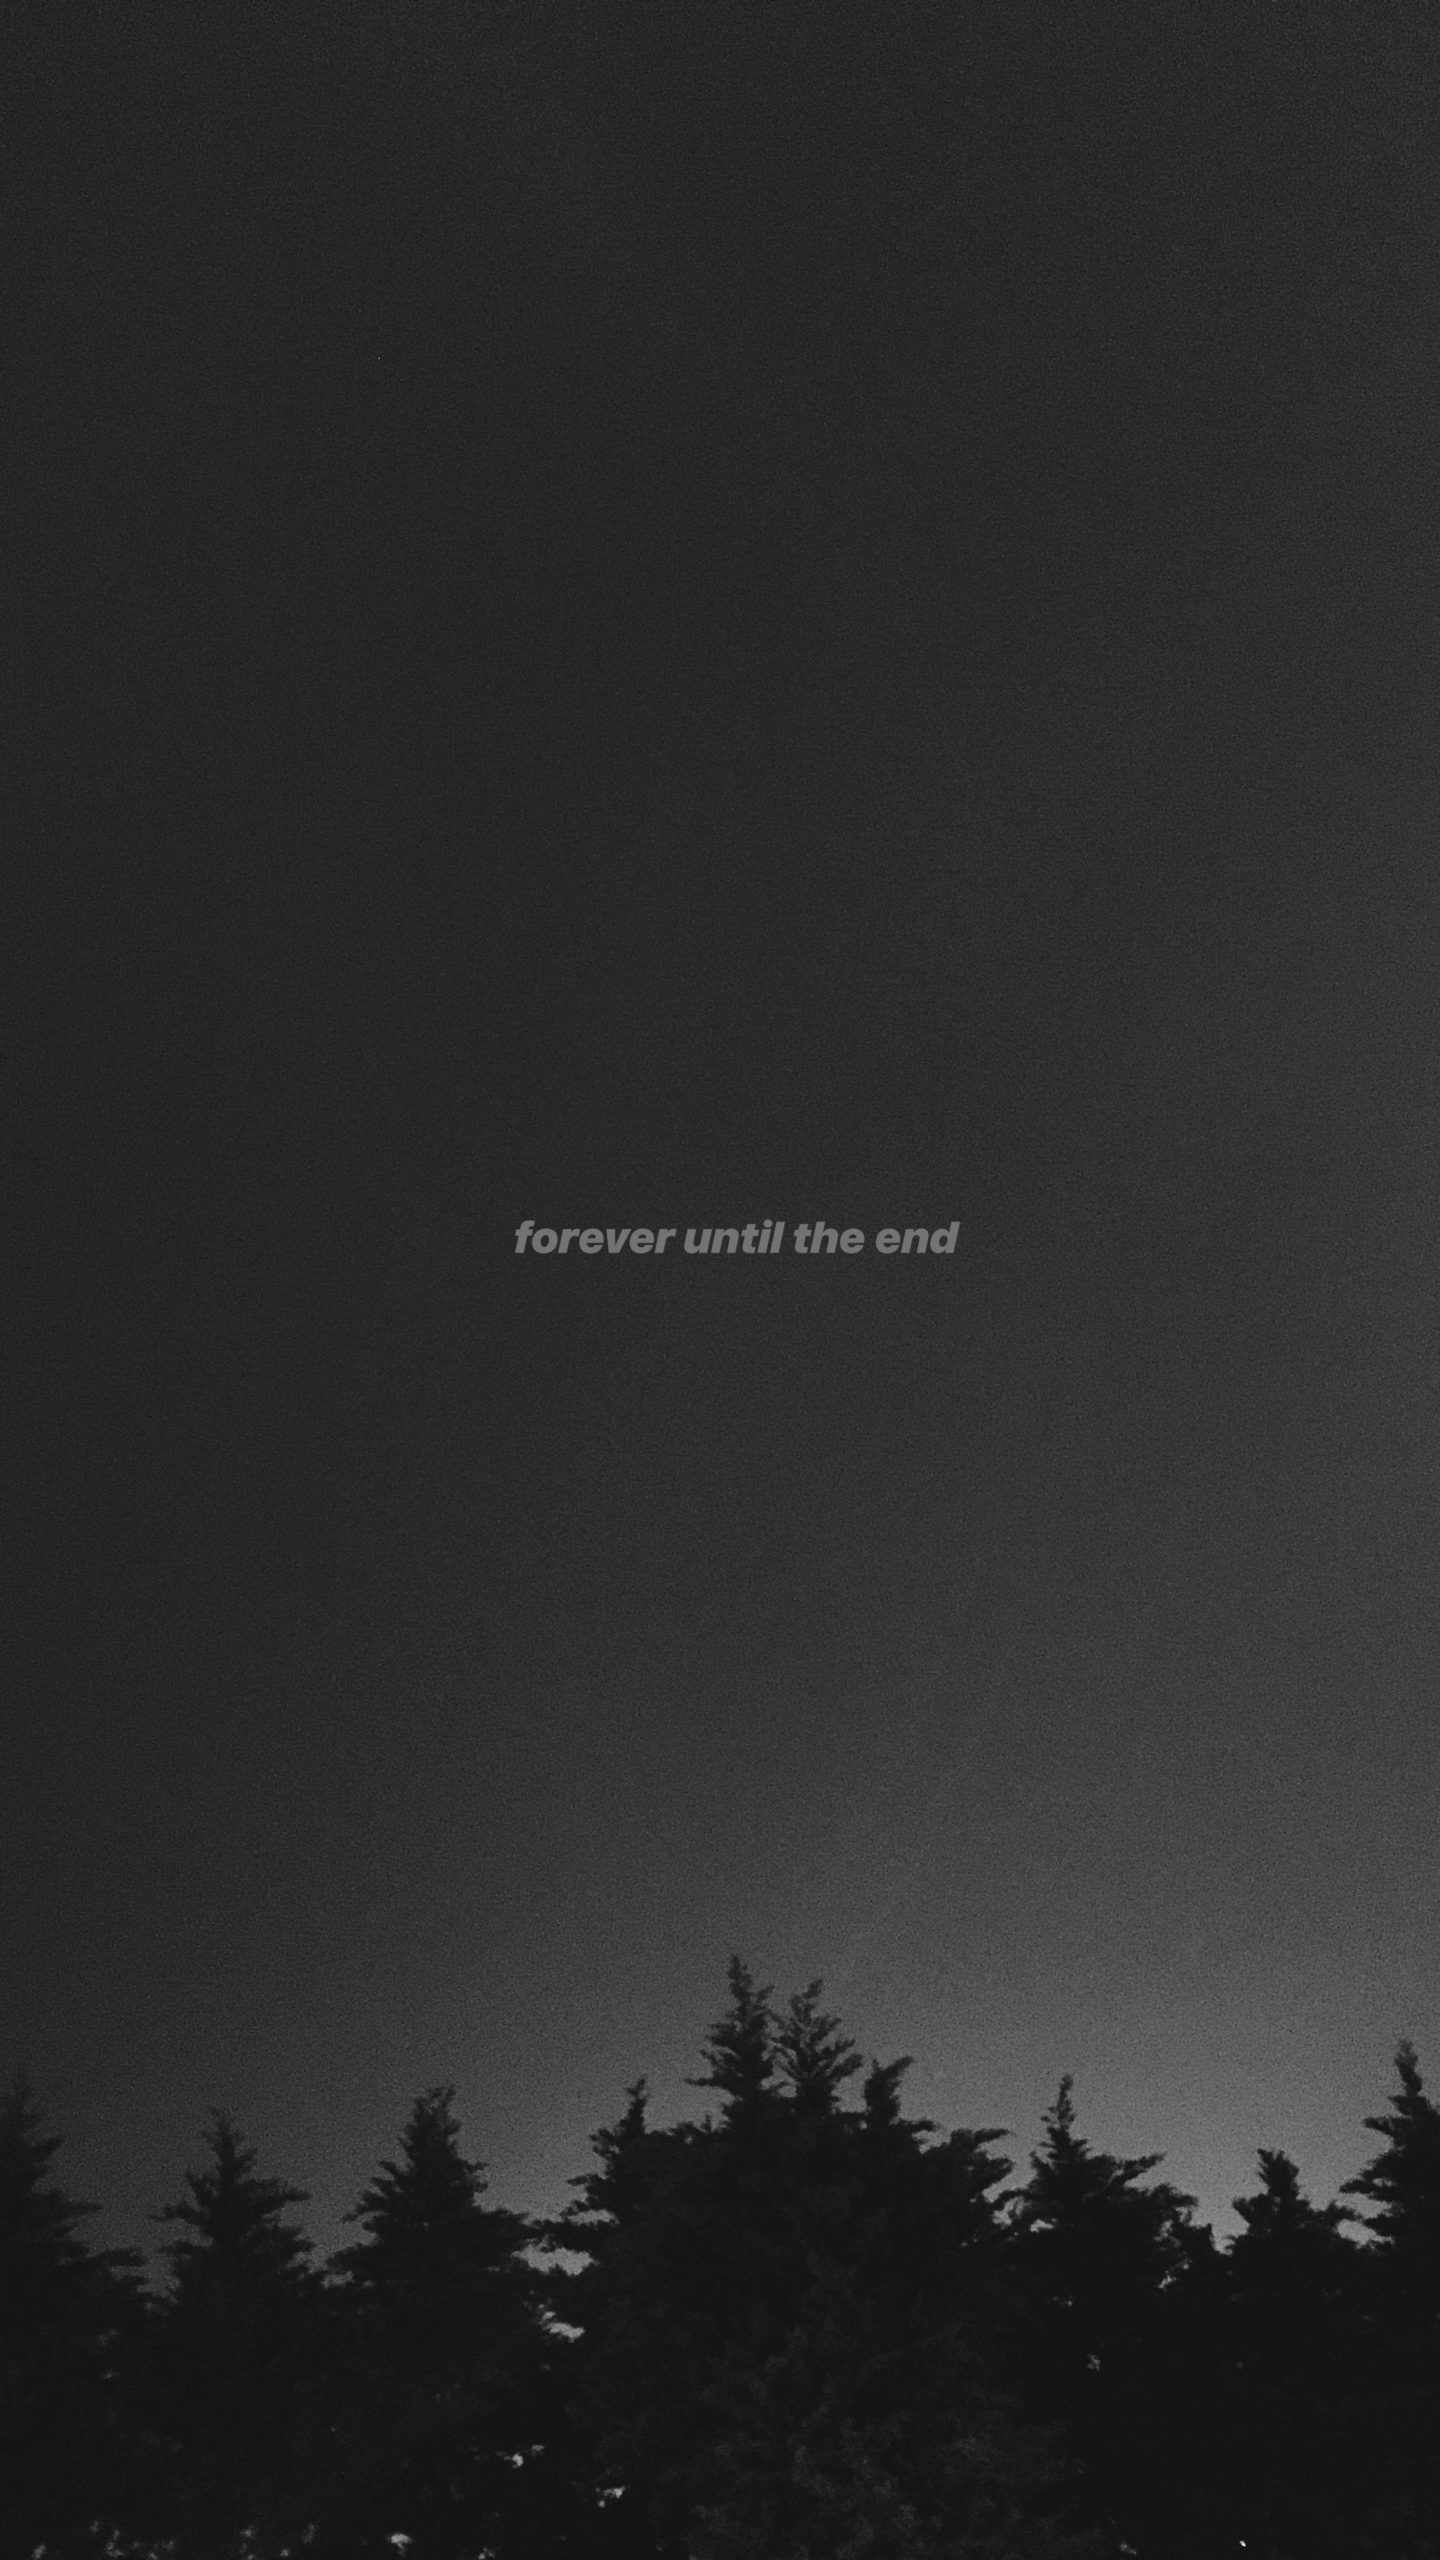 Sad Aesthetic Wallpaper, Forever Until The End - Wallpaperforu